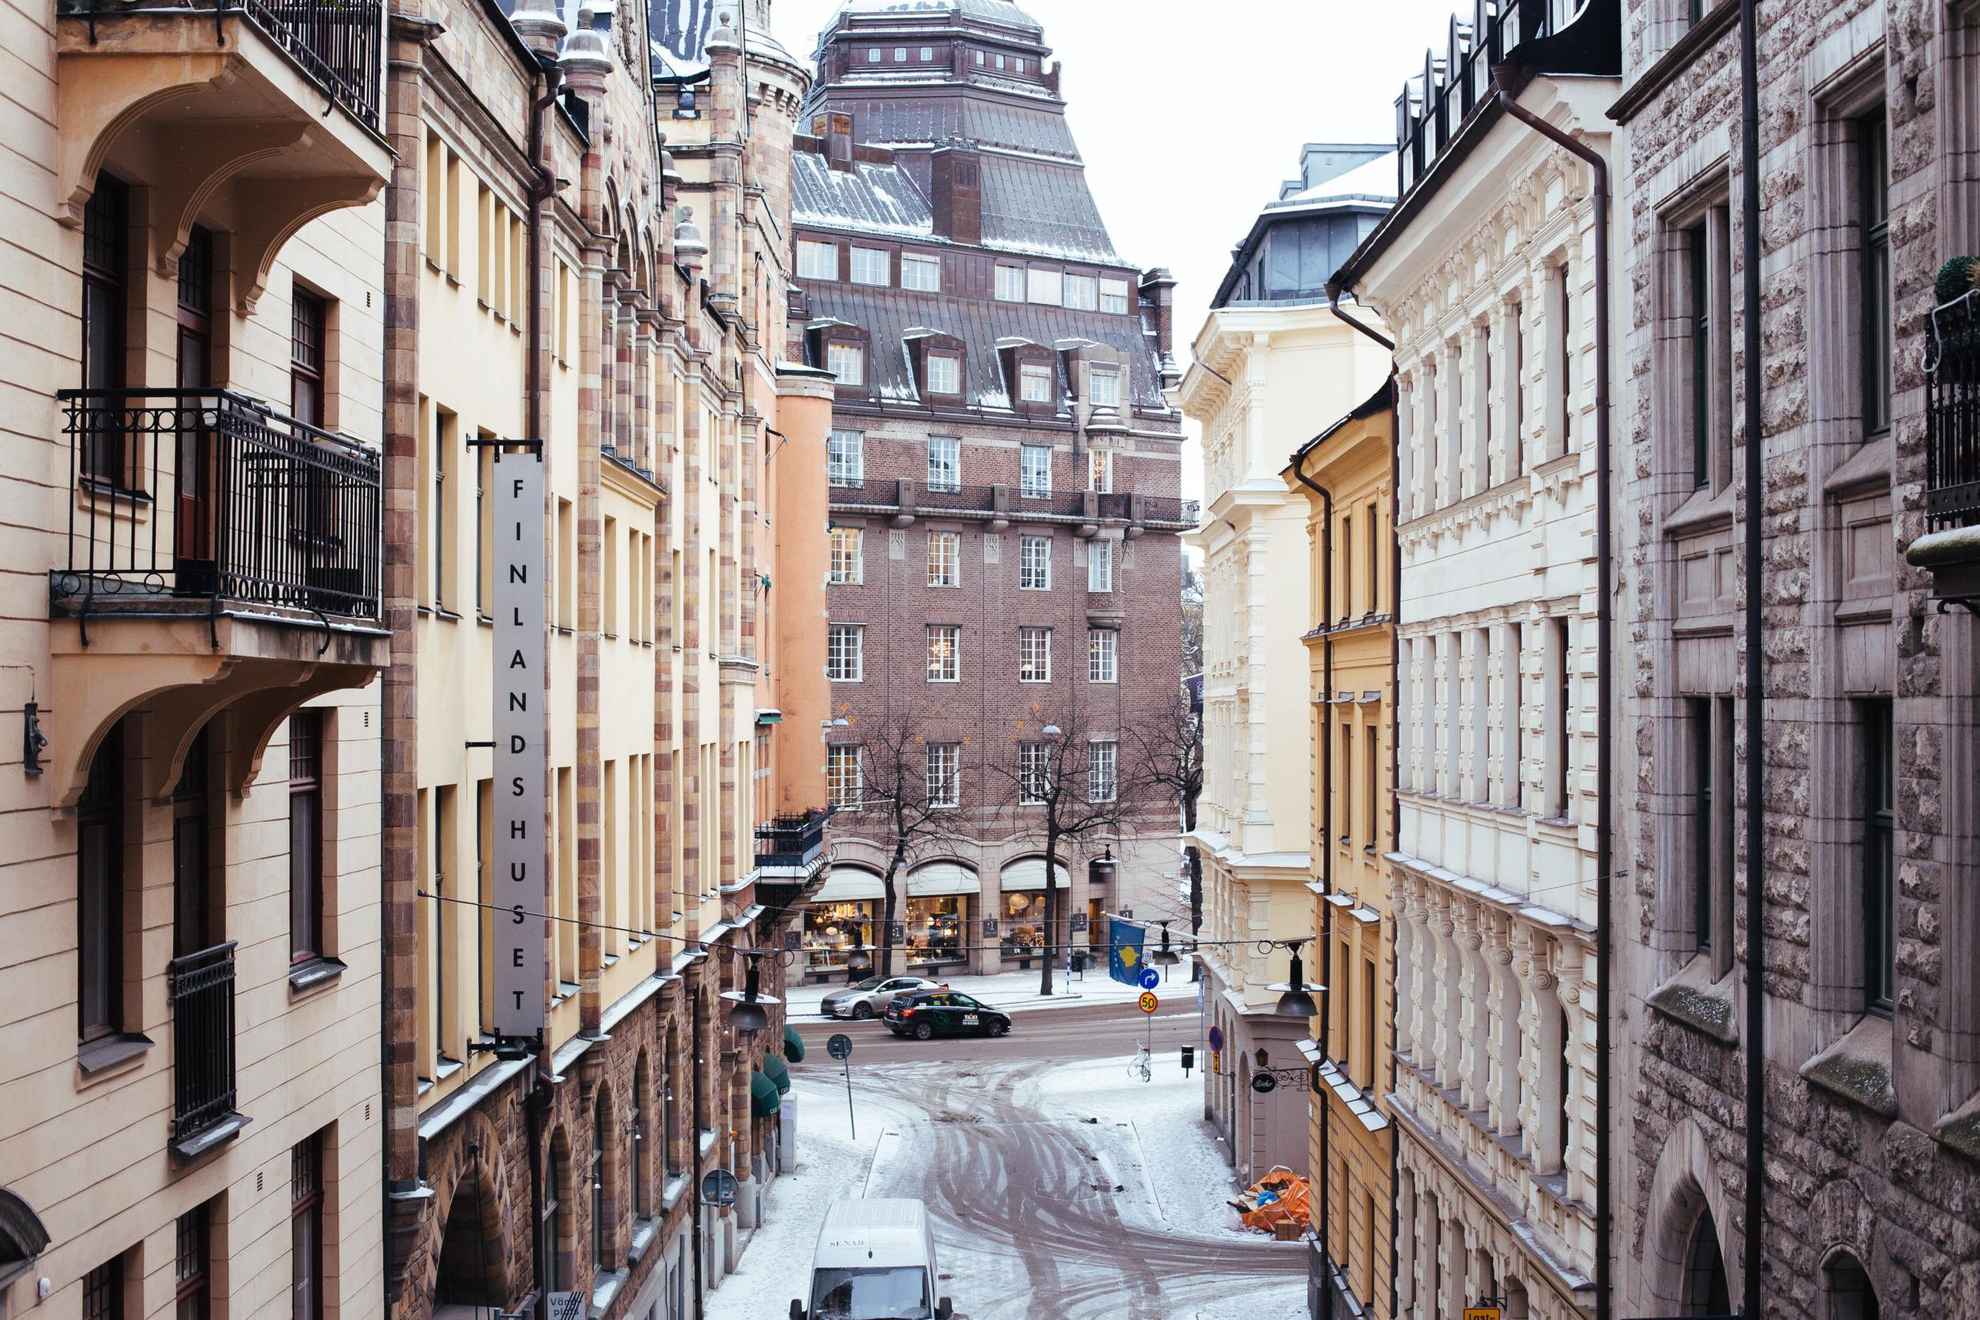 The street Snickarbacken in Stockholm